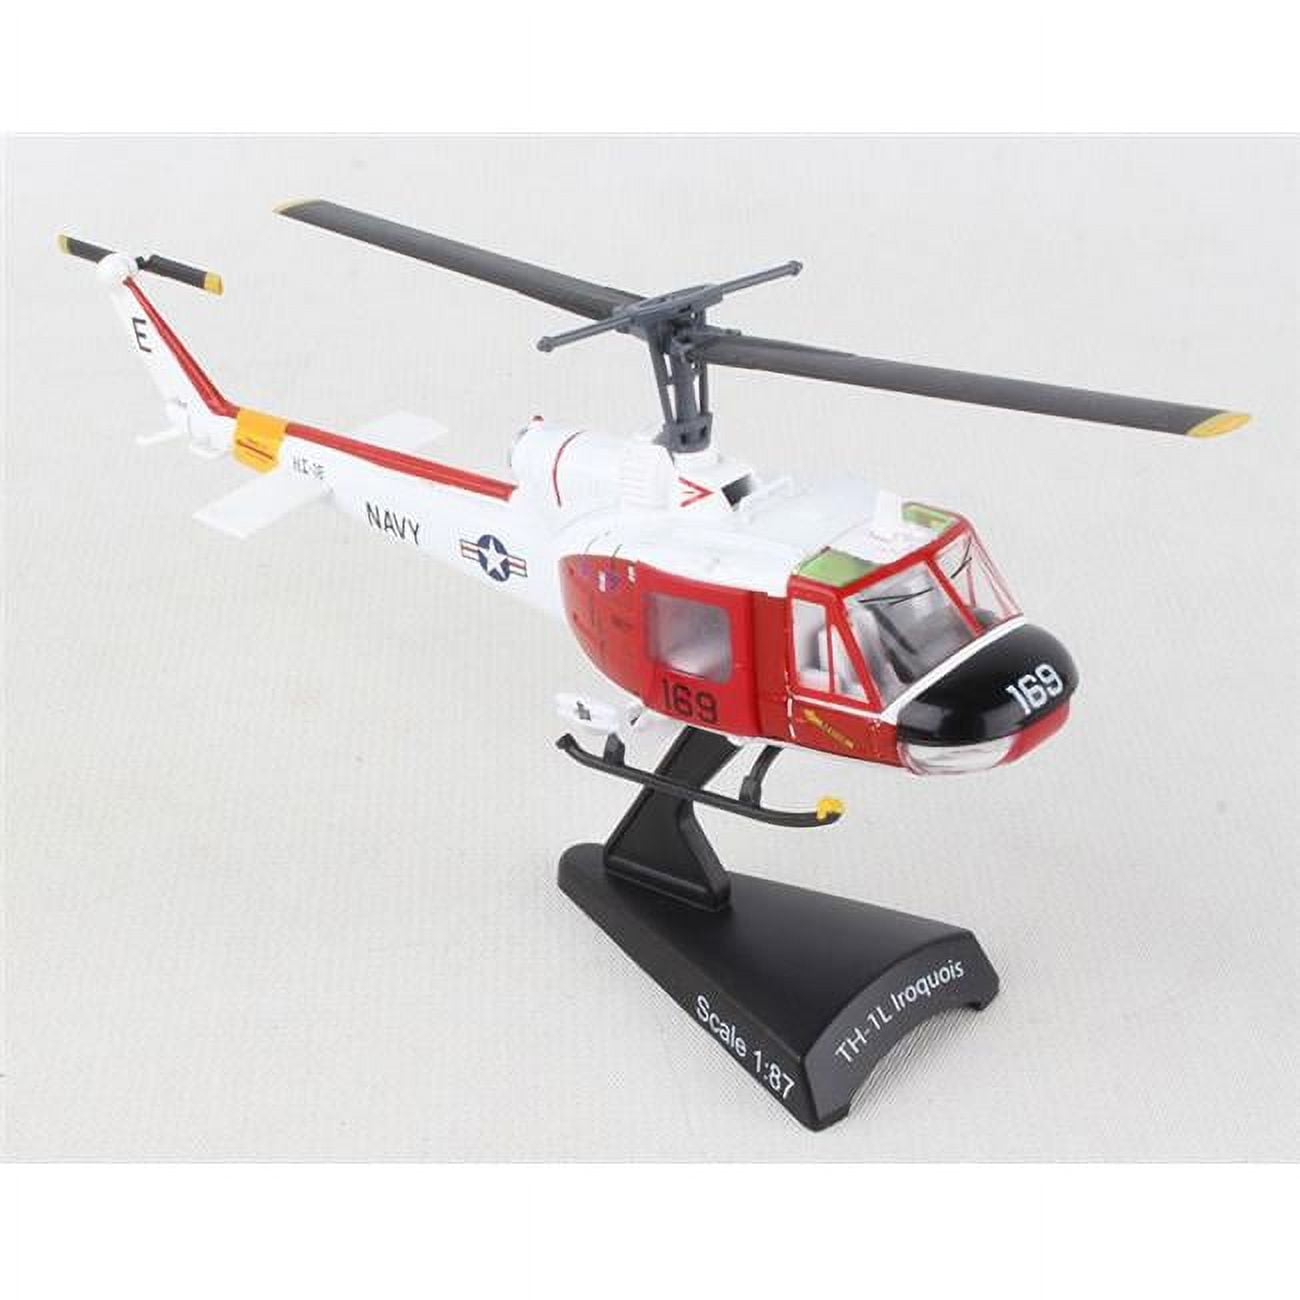 Picture of Daron DARPS5601-3 5.87 in. H-1L US Navy Helicopter, Red